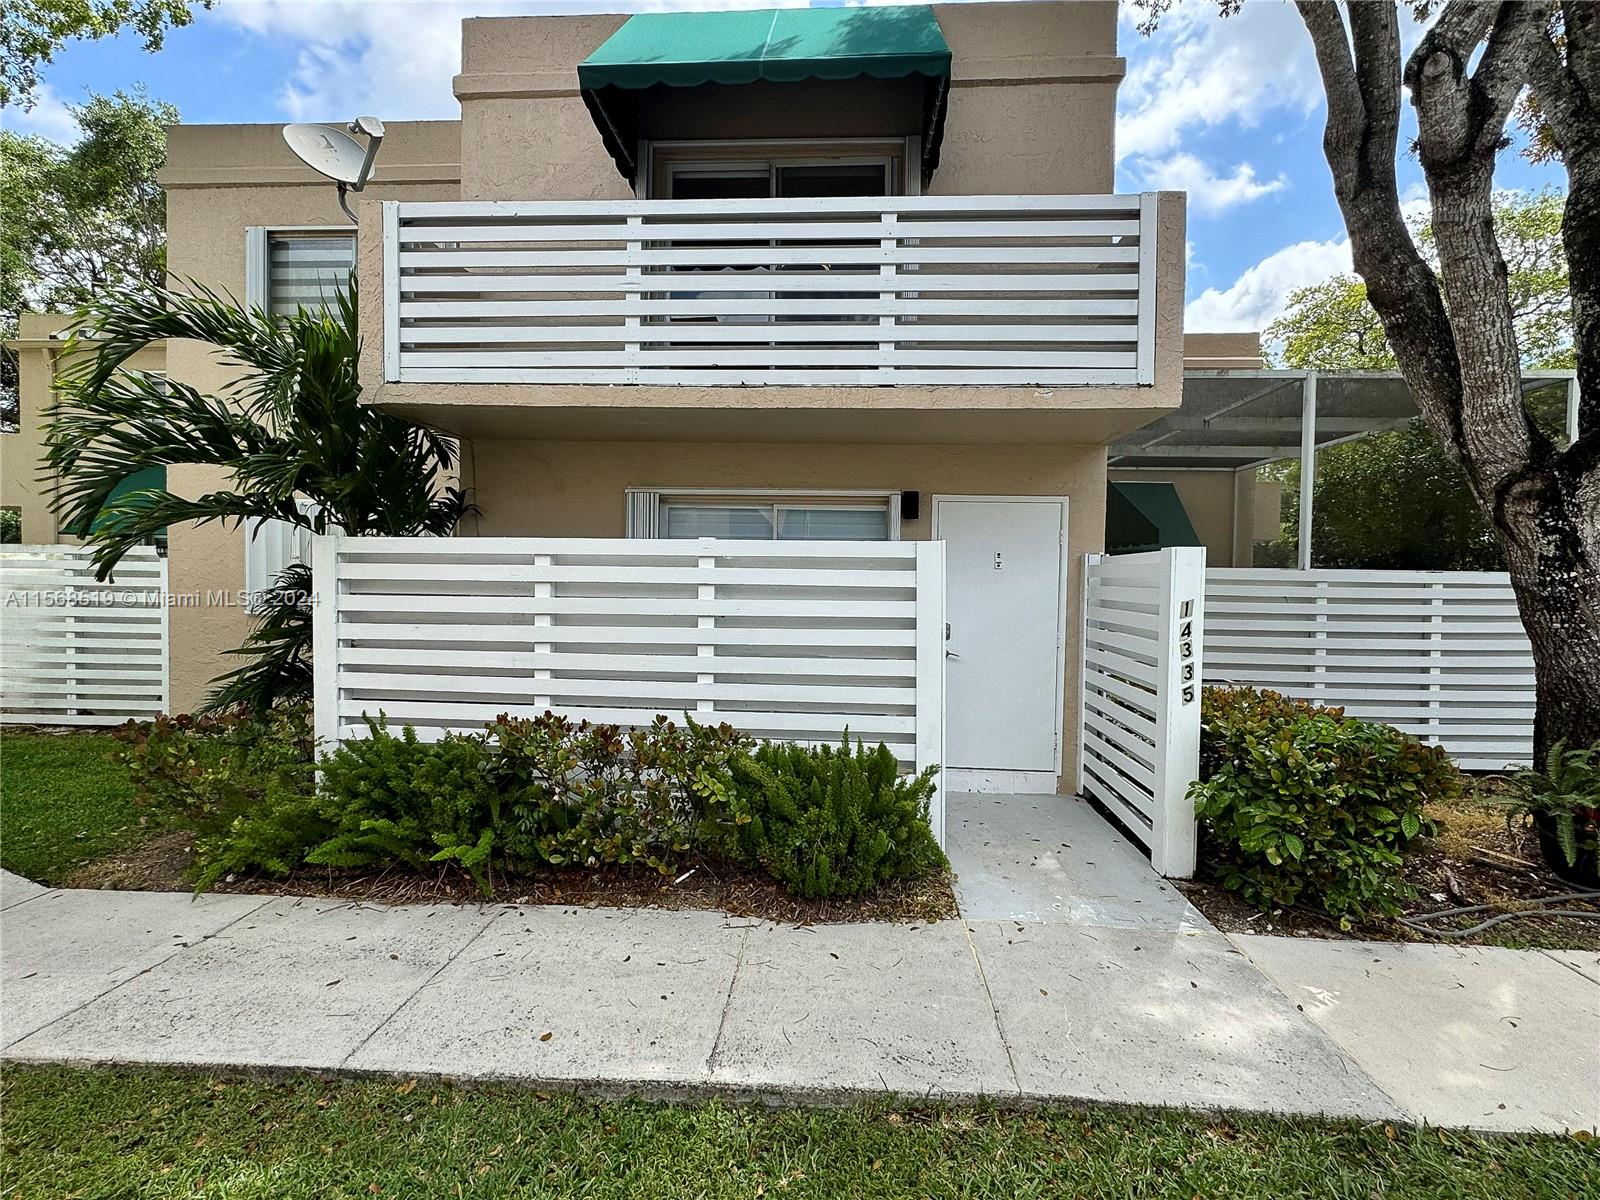 14335 SW 96th Ter 14335, Miami, Florida 33186, 3 Bedrooms Bedrooms, ,2 BathroomsBathrooms,Residentiallease,For Rent,14335 SW 96th Ter 14335,A11568519